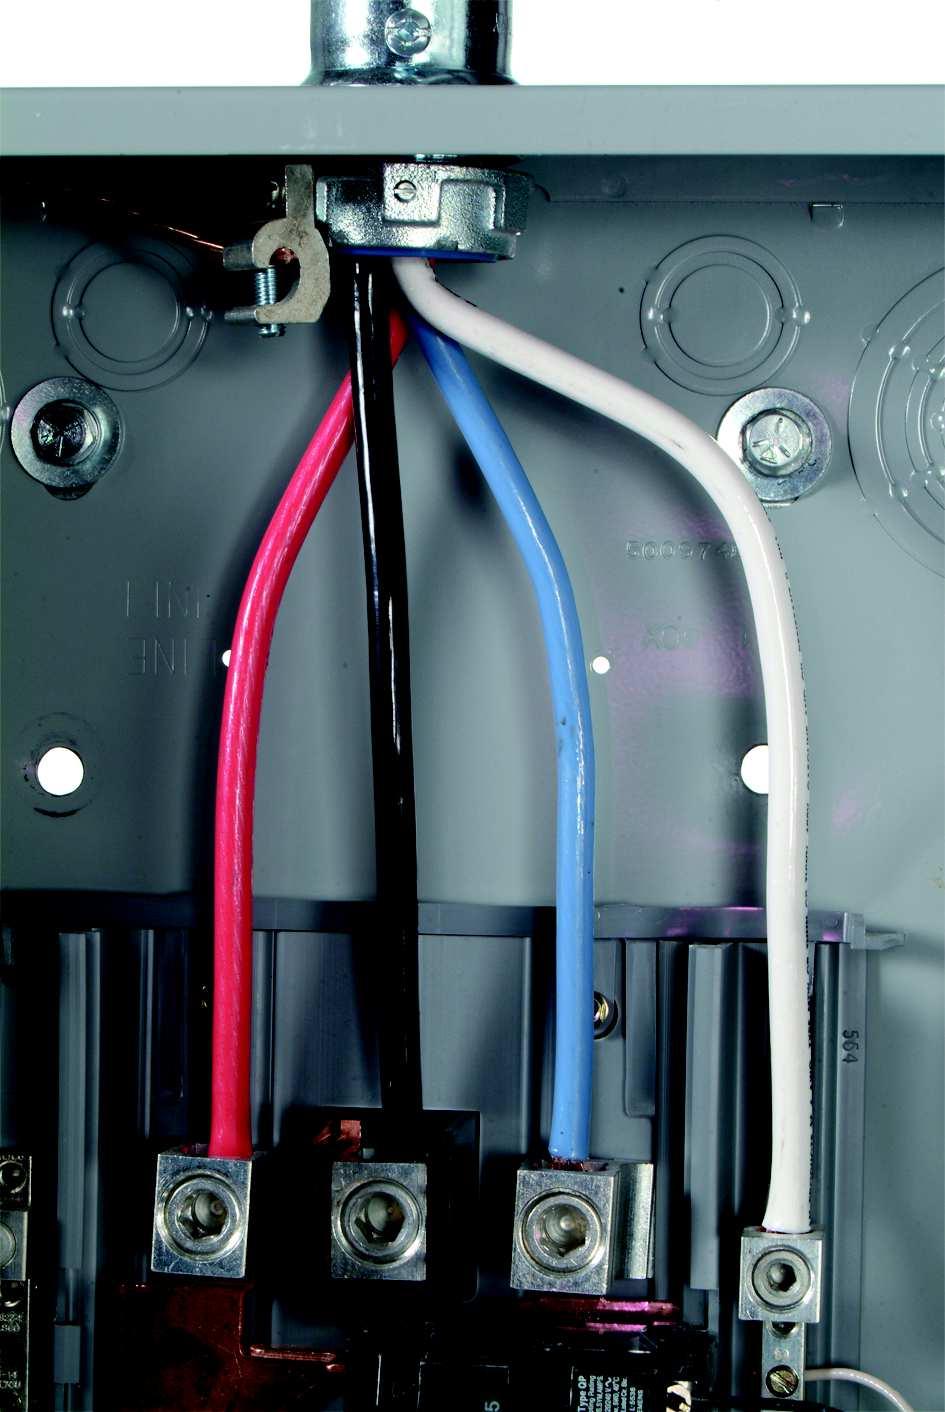 23. Make sure the setscrews on the feeder circuit breaker terminals, MDP neutral/ground bus, and bushing with bonding jumper are well-tightened to ensure solid connections of the conductors.